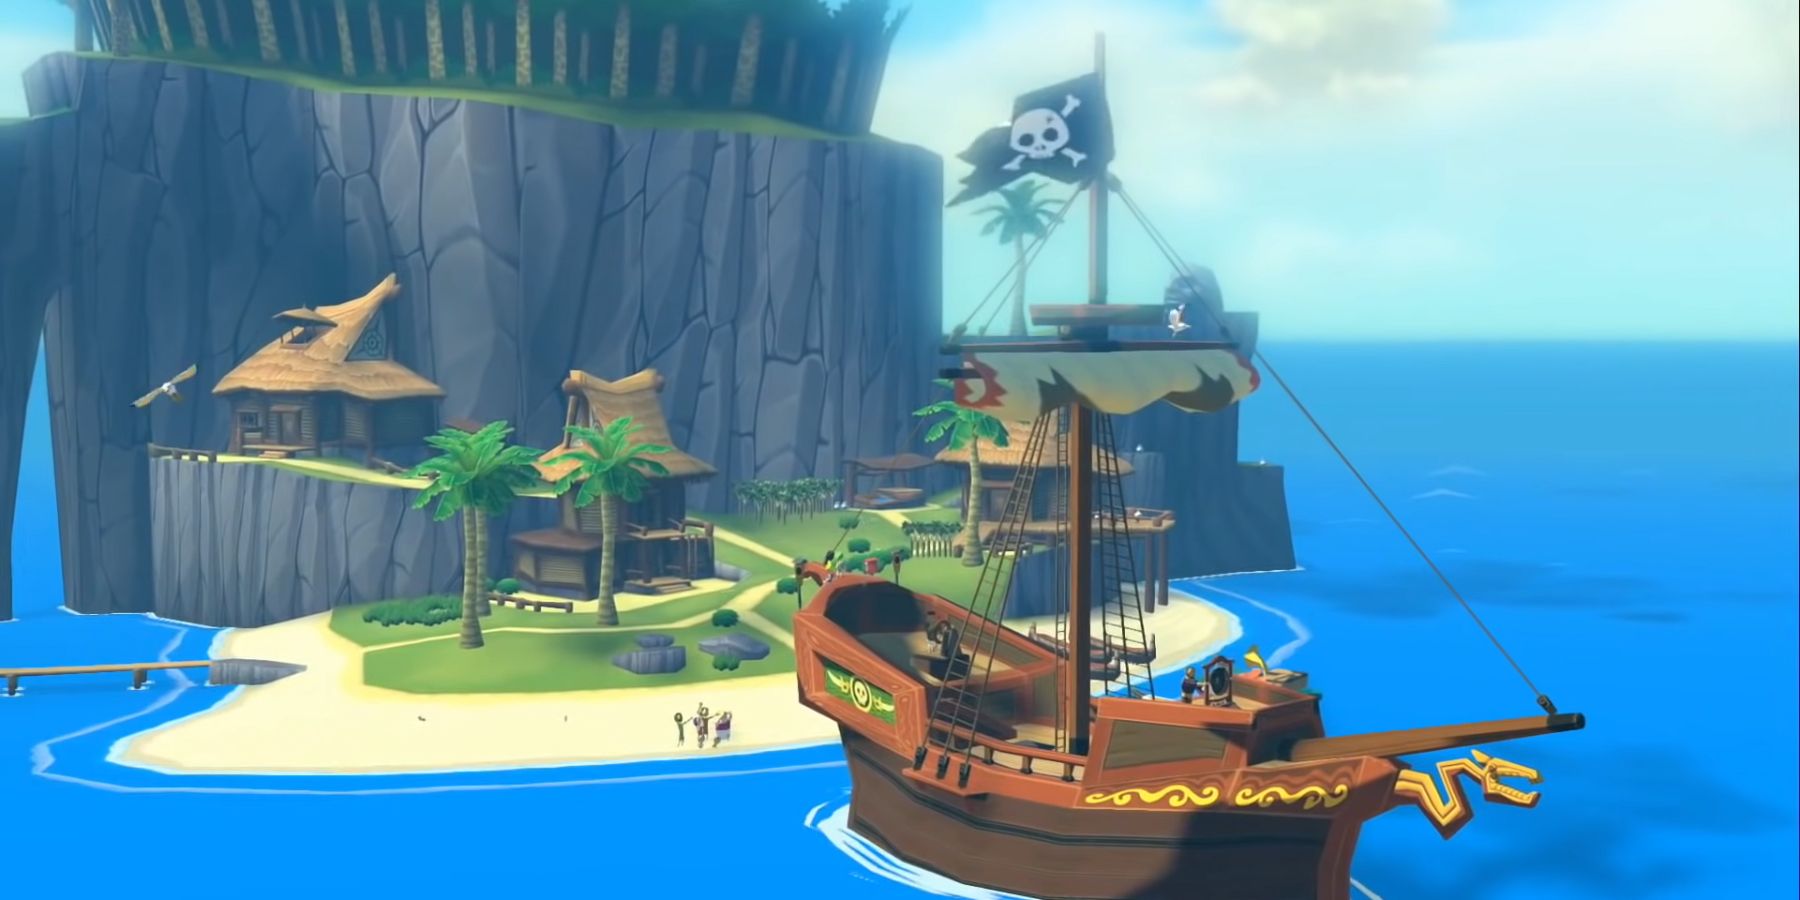 Every island in The Wind Waker has a unique name, often with relevant or hidden meanings.